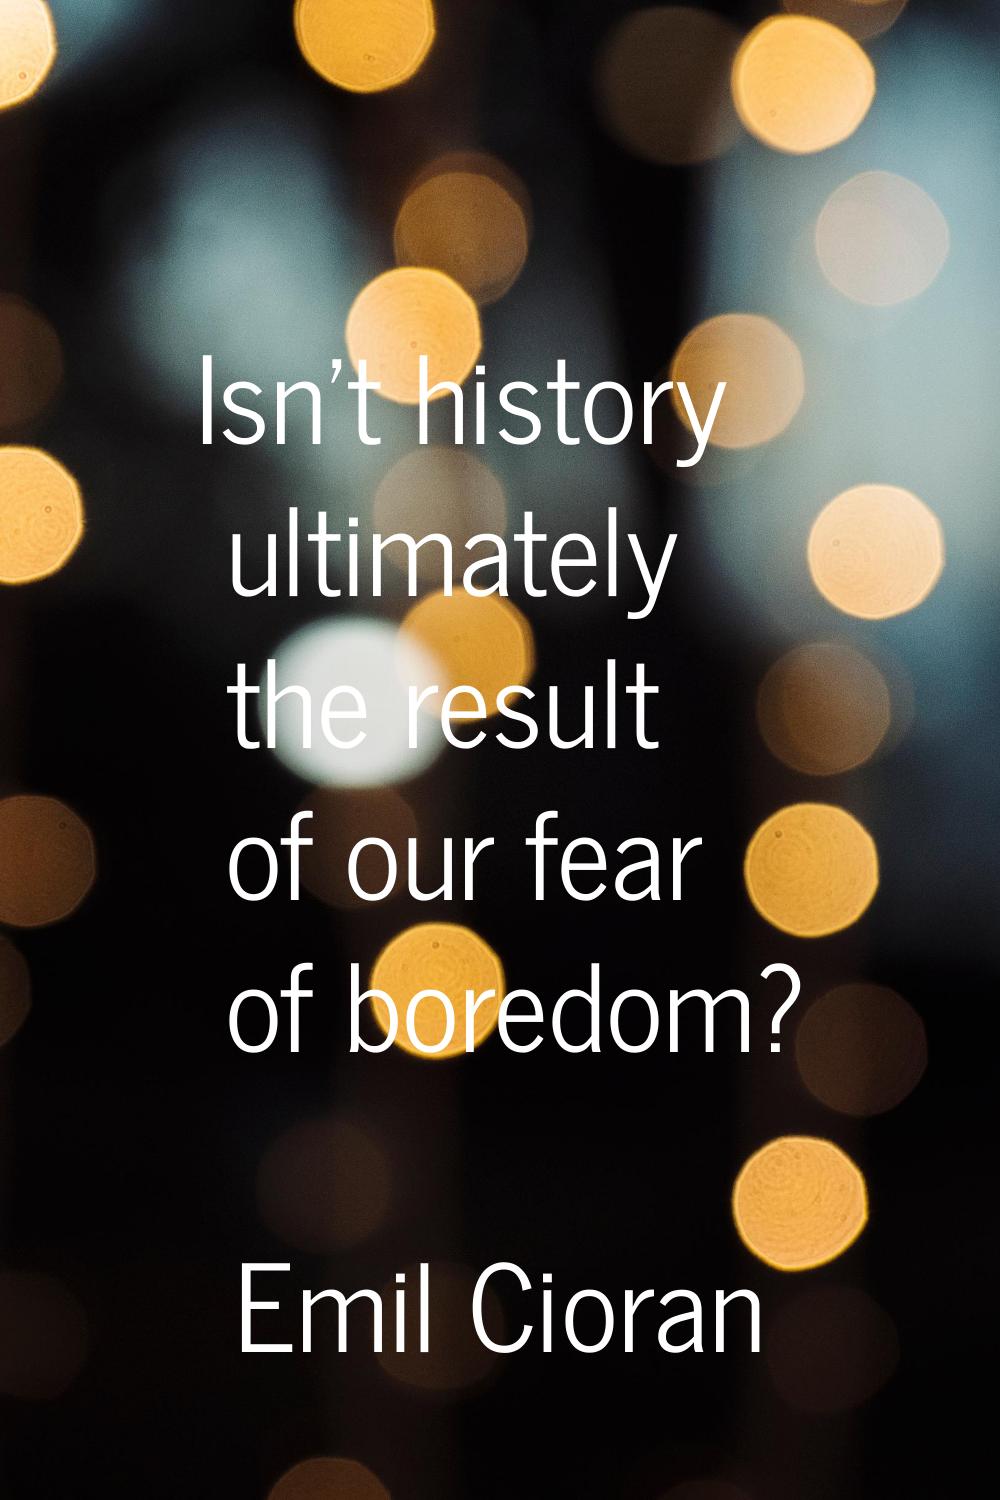 Isn't history ultimately the result of our fear of boredom?